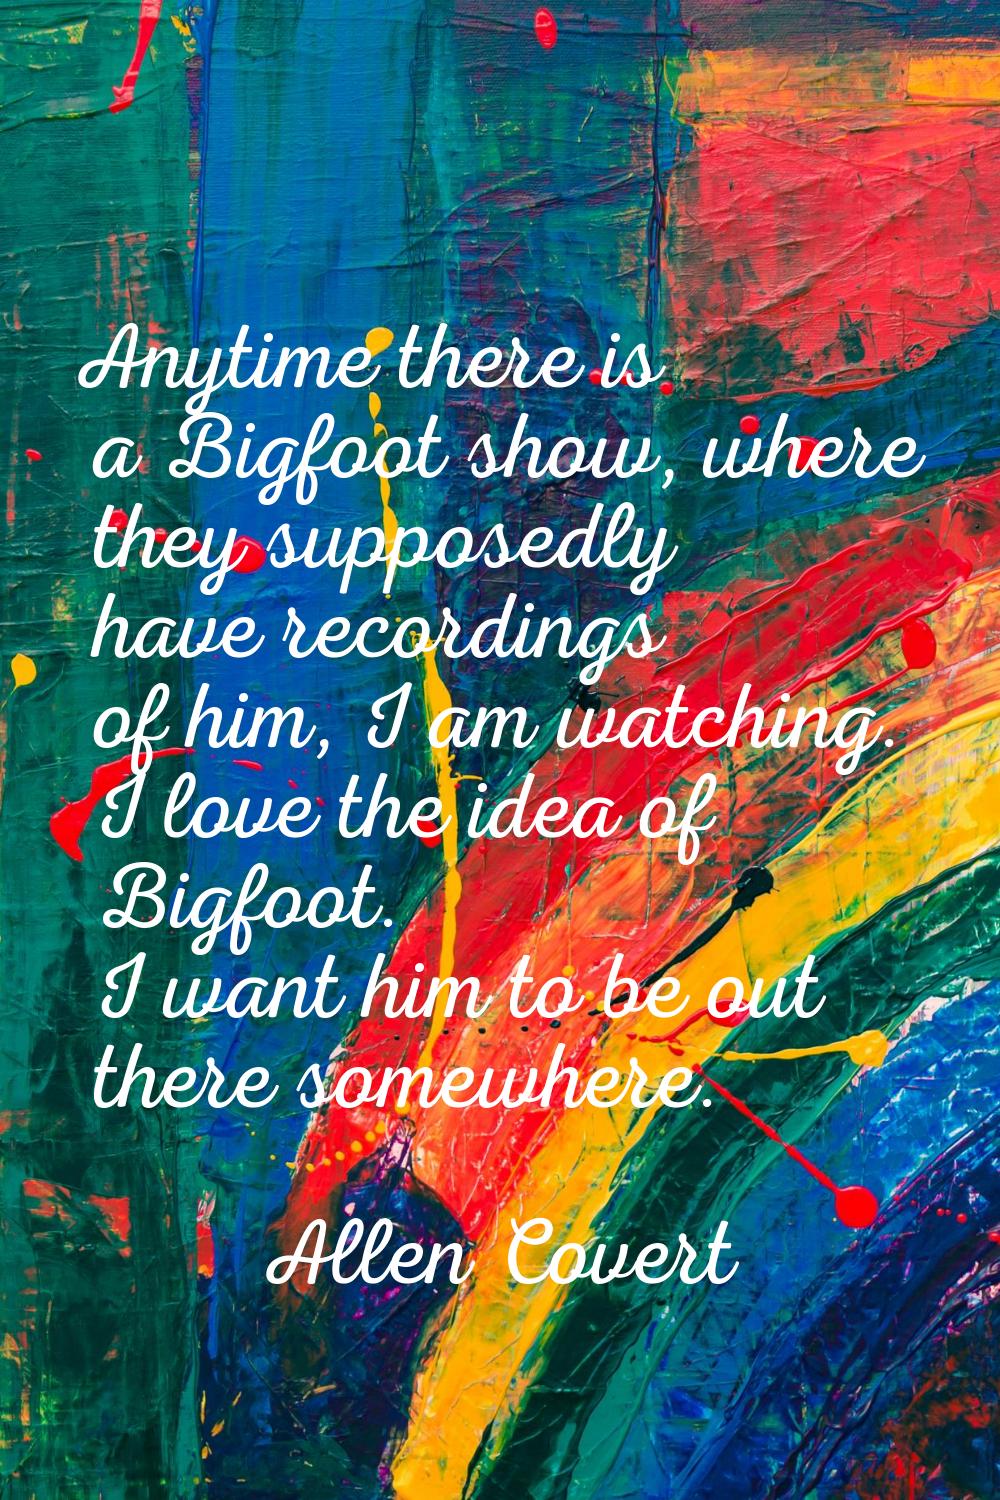 Anytime there is a Bigfoot show, where they supposedly have recordings of him, I am watching. I lov